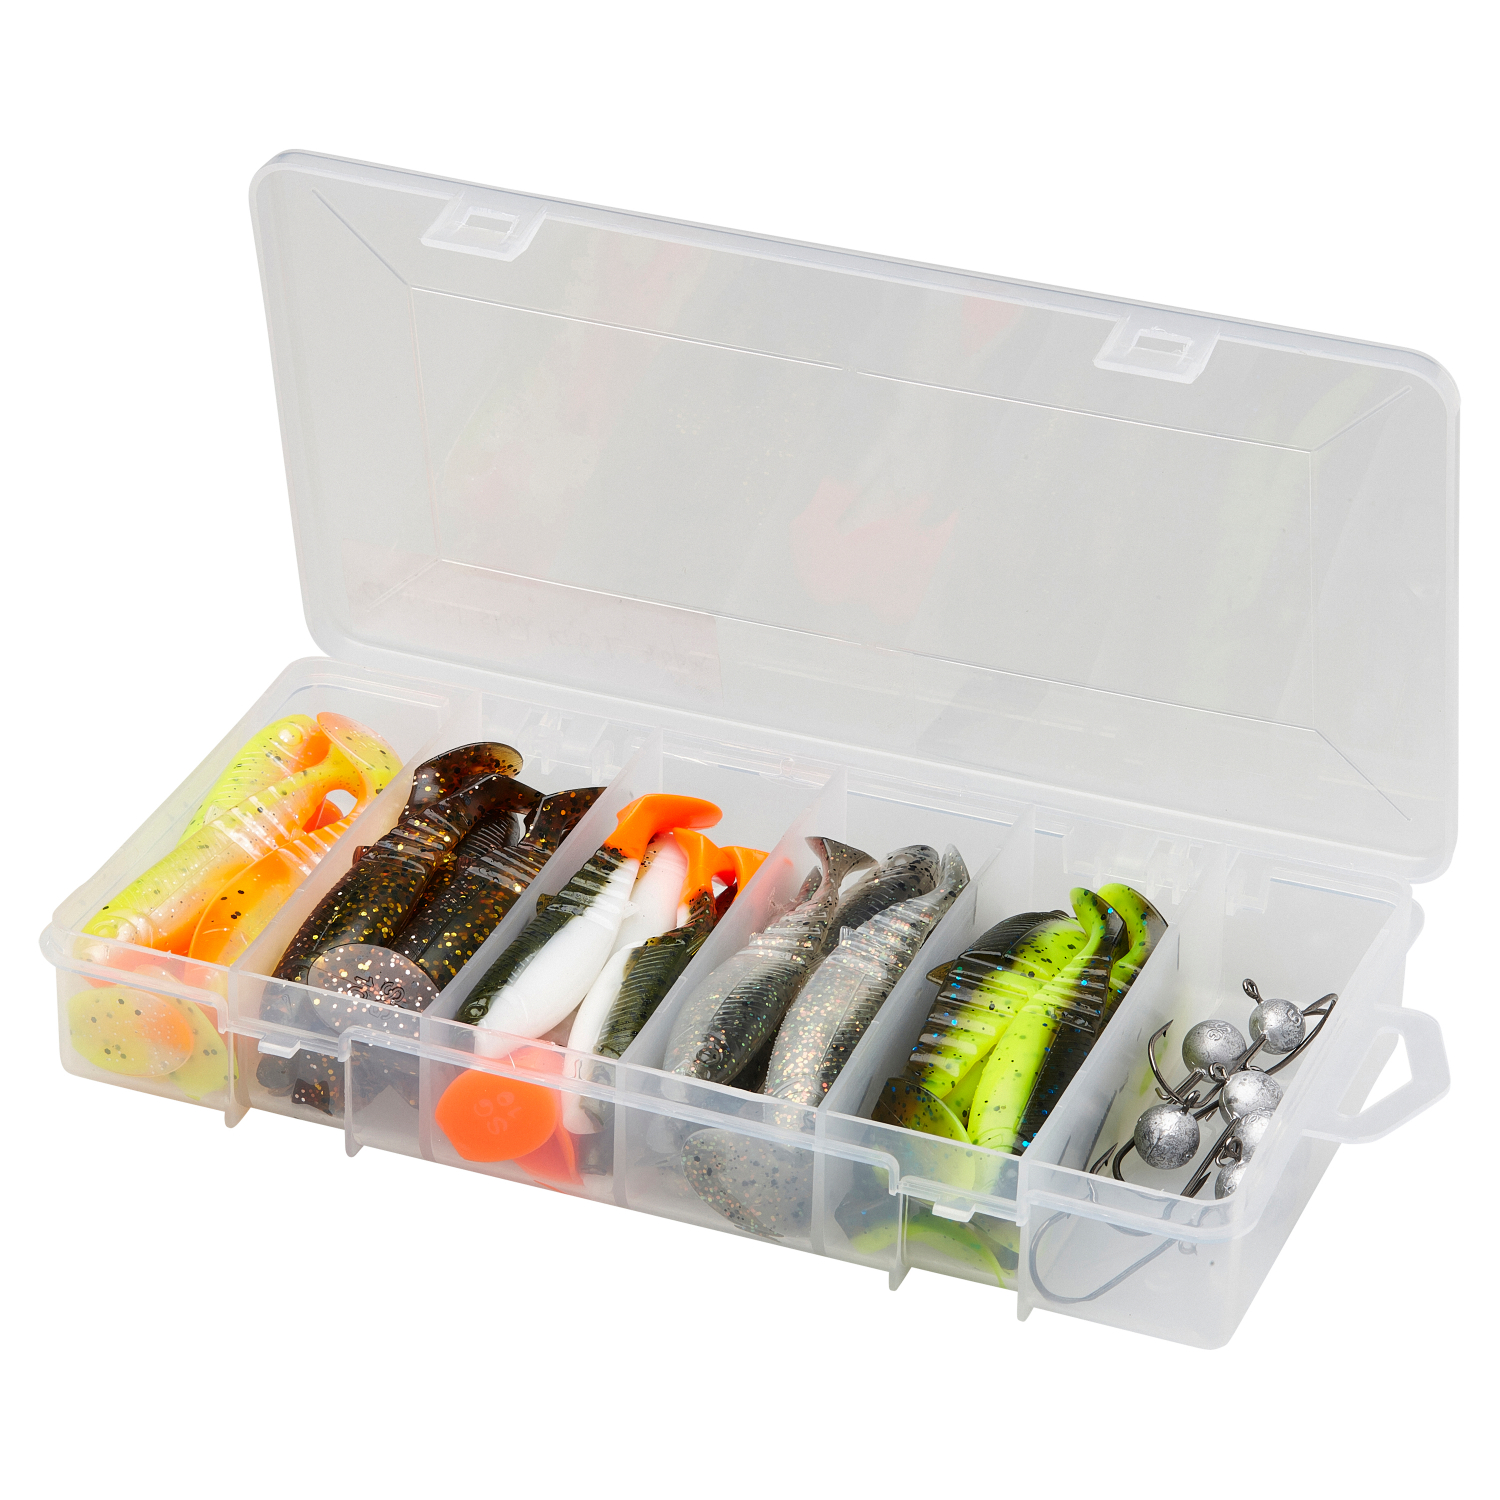 Savage Gear Bait set Cannibal Shad Kit at low prices